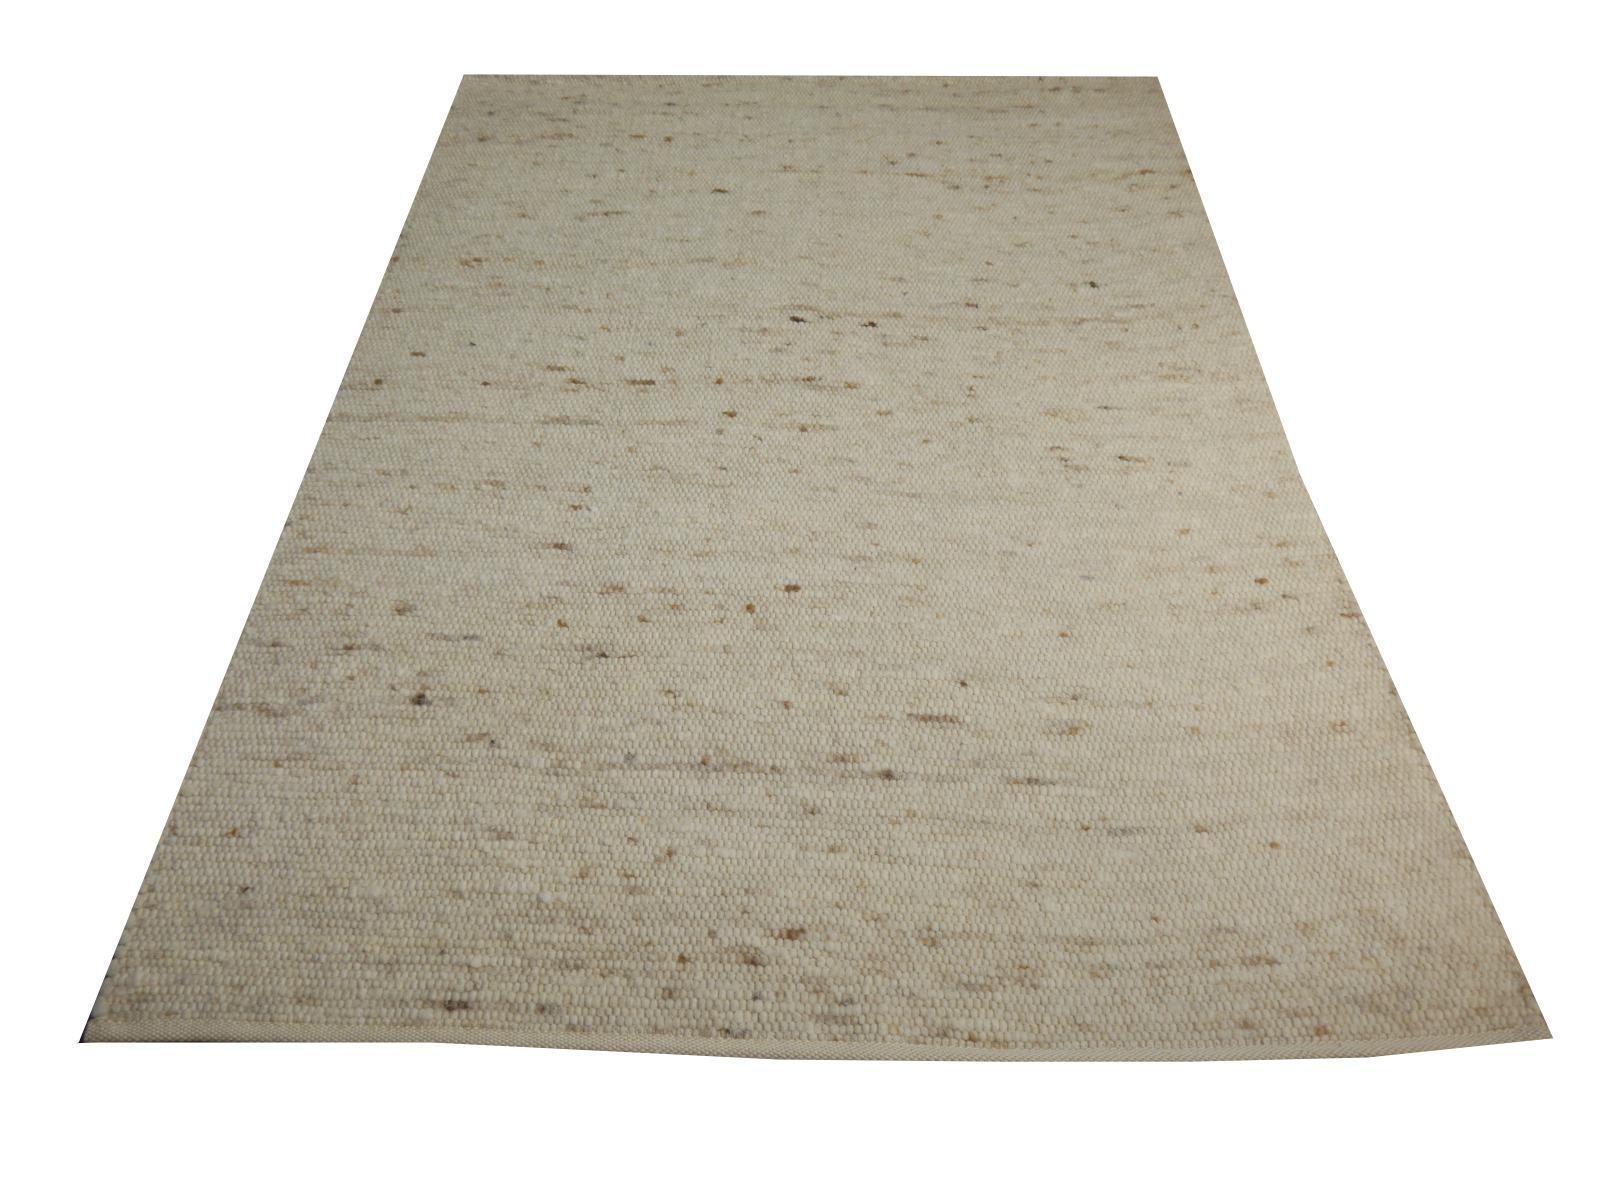 European Kilim rug hand-woven carpet
Rustic Beige Kilim Rug Wool Flat Hand-Woven European Carpet by Djoharian Design
Marble Kilim rugs are made in Europe / Hungary. It is a long tradition in many countries between Poland and the Balkans to make